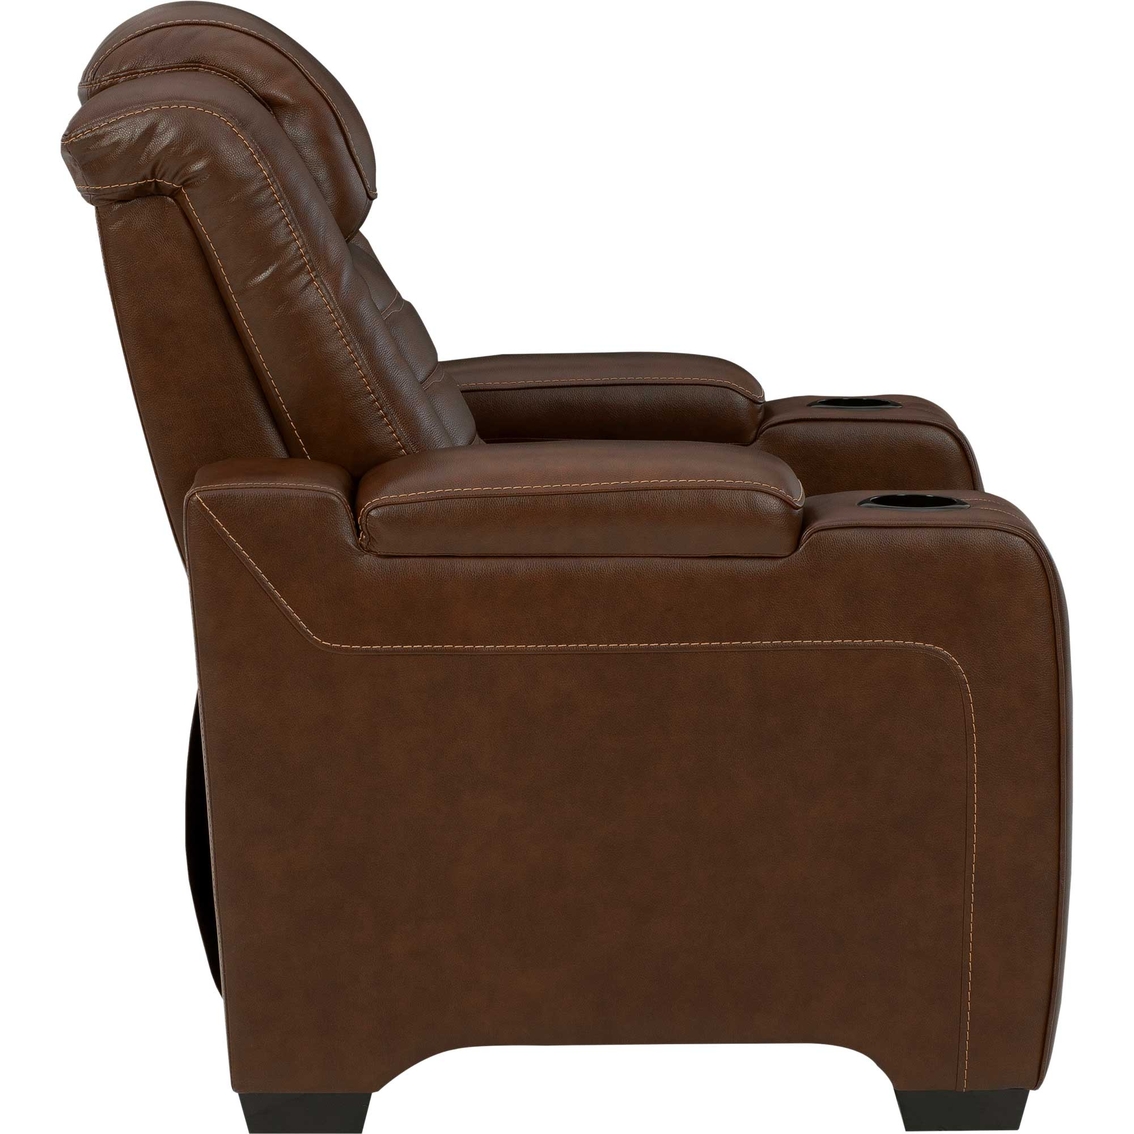 Signature Design by Ashley Backtrack Power Recliner with Adjustable Headrest - Image 4 of 9